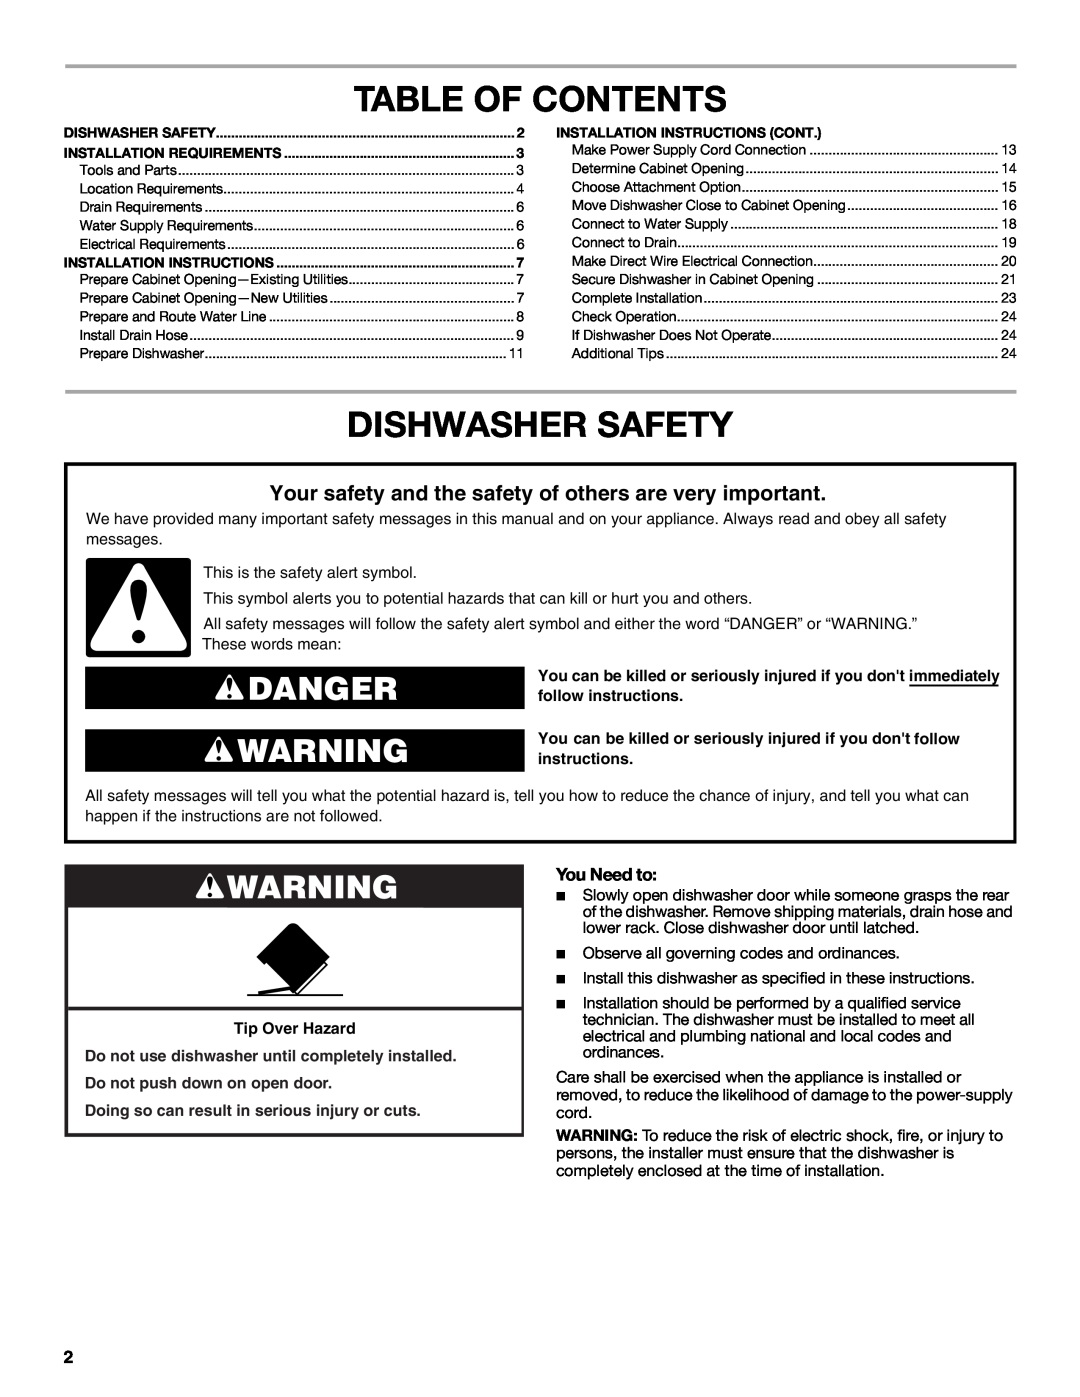 Maytag W10532762A installation instructions Table Of Contents, Dishwasher Safety, Danger, You Need to 